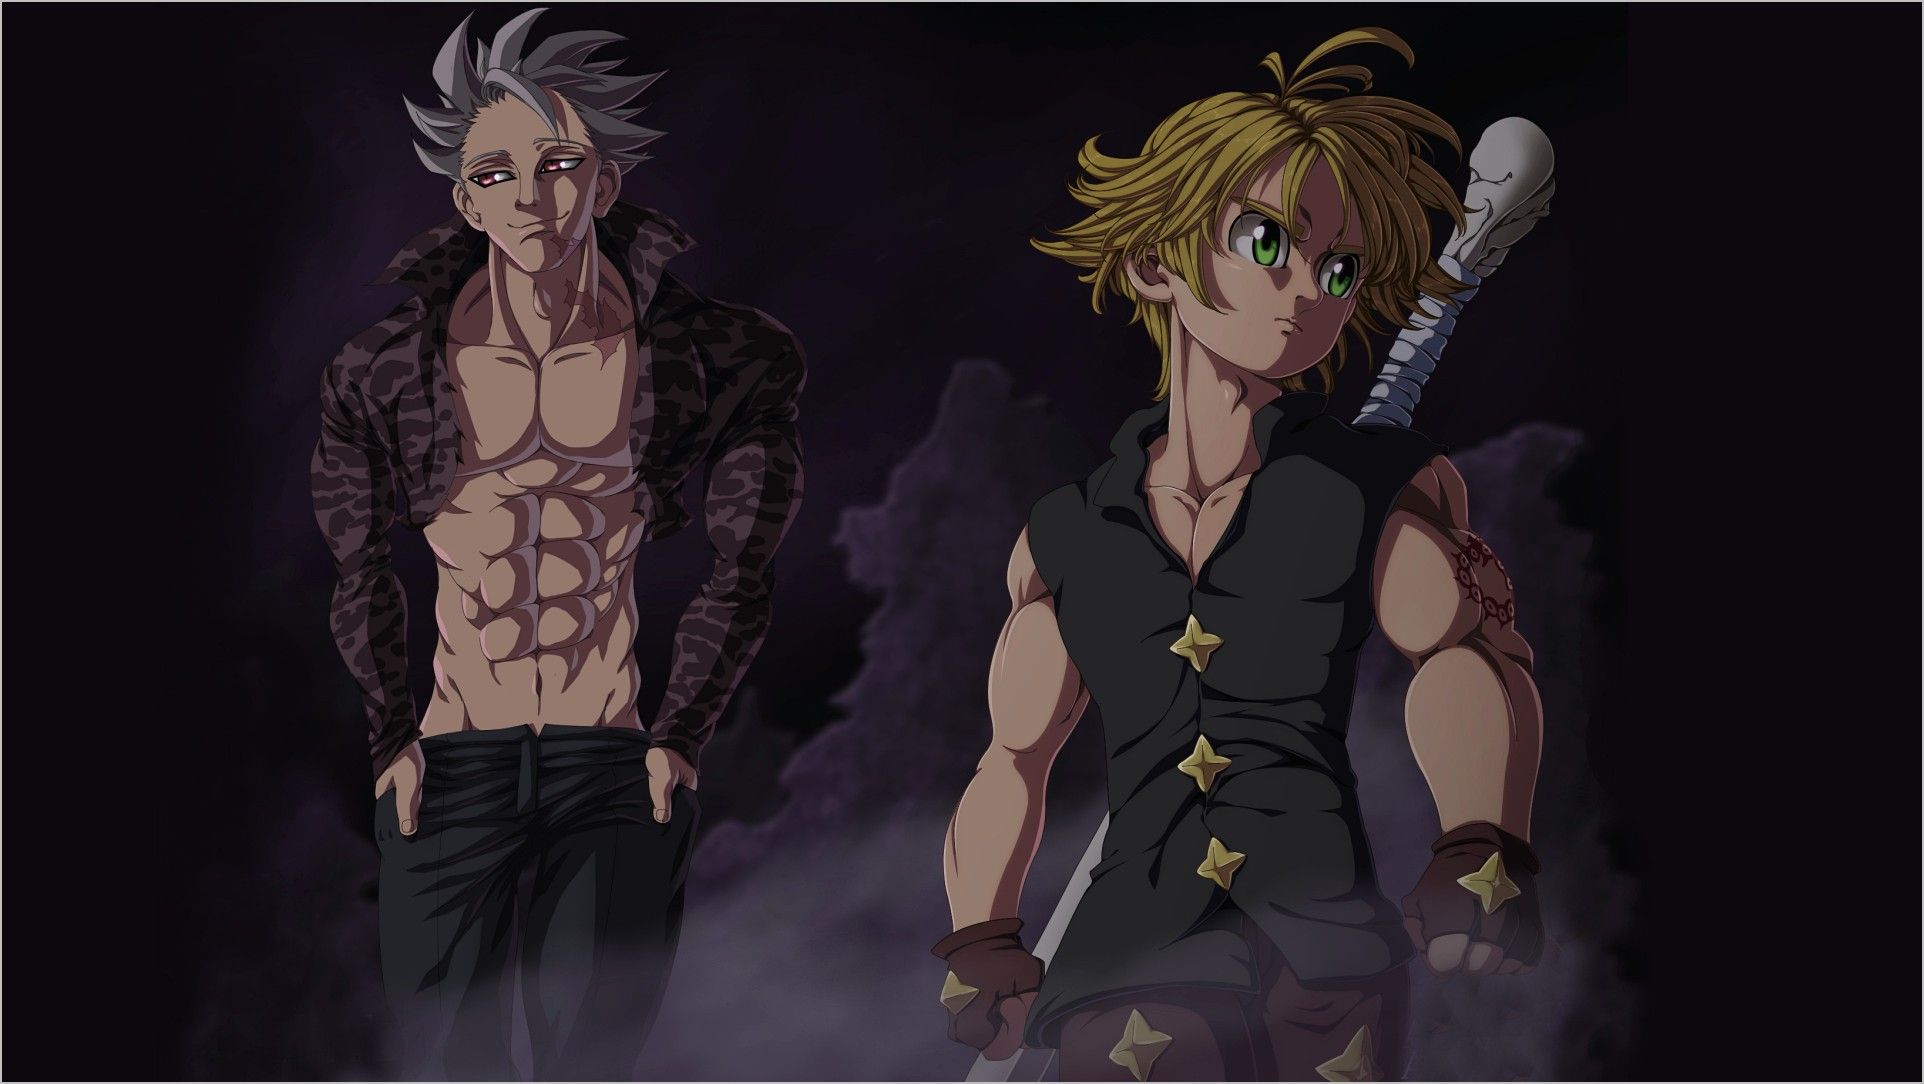 meliodas the seven deadly sins anime boy samsung g iPhone Wallpapers  Free Download